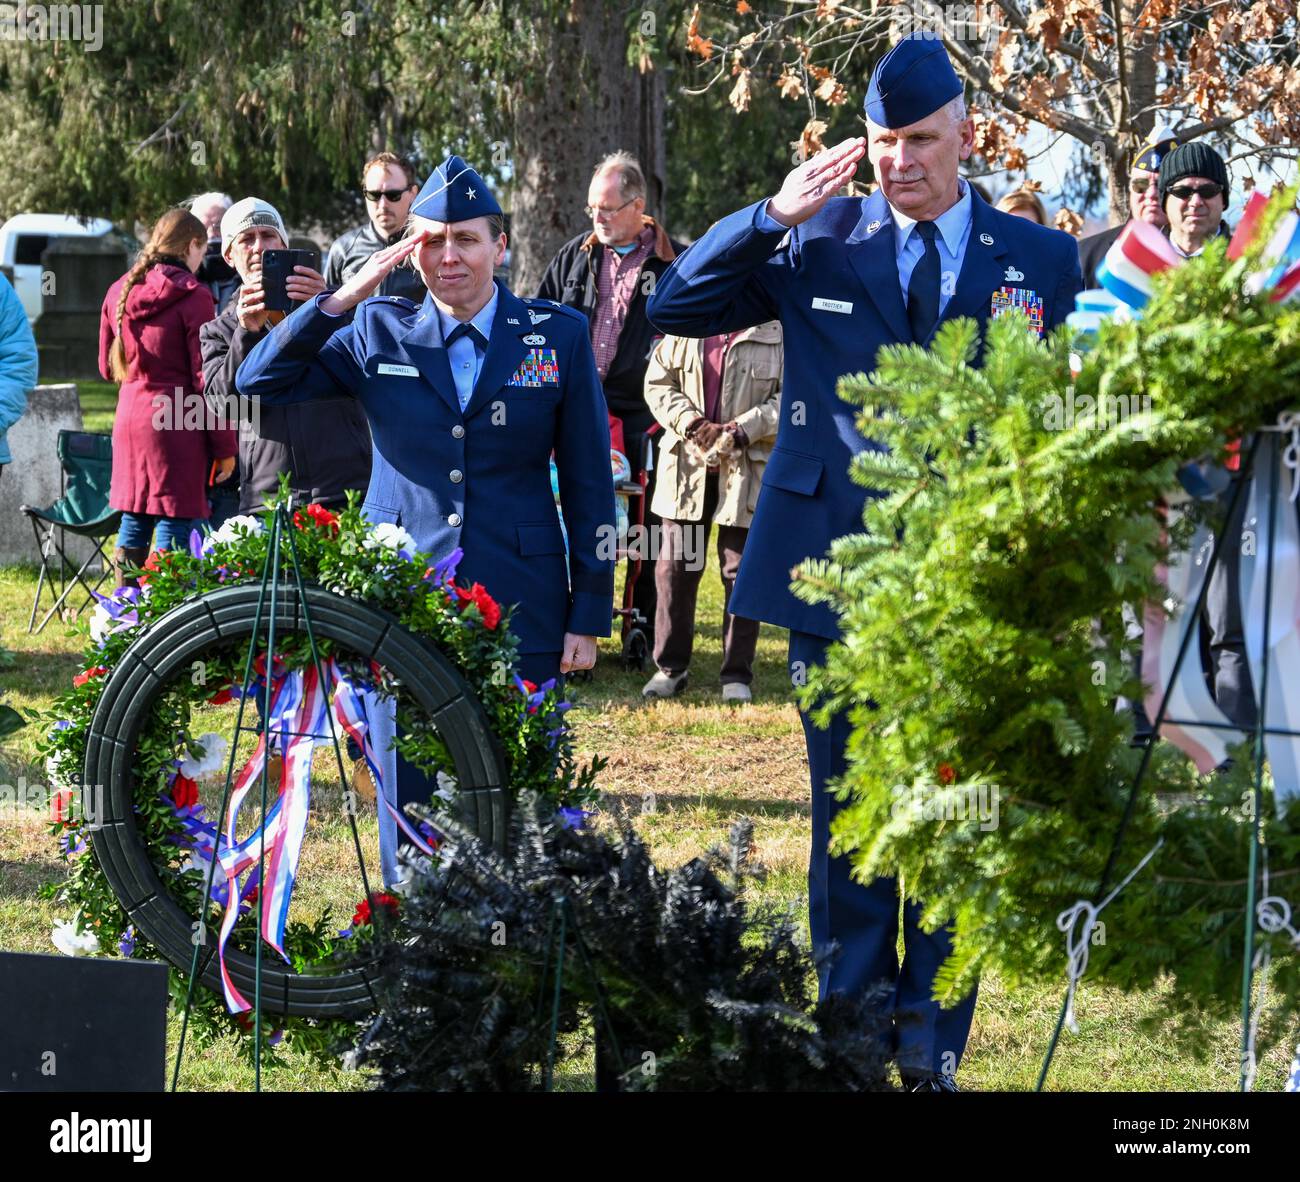 Brig. General Denise Donnell, the commander of the New York Air National Guard, and Command Chief Master Sgt. Jeffery Trottier, salute after placing a wreath from President Joseph Biden at the grave of President Martin Van Buren in Kinderhook, New York on the 240th anniversary of his birth on Dec. 5, 1872. Since 1967 military officers have presented a wreath from the current president at the gravesite of previous presidents on the anniversary of their birth. ( U.S. Army National Guard photo by Staff Sgt. Matthew Gunther) Stock Photo